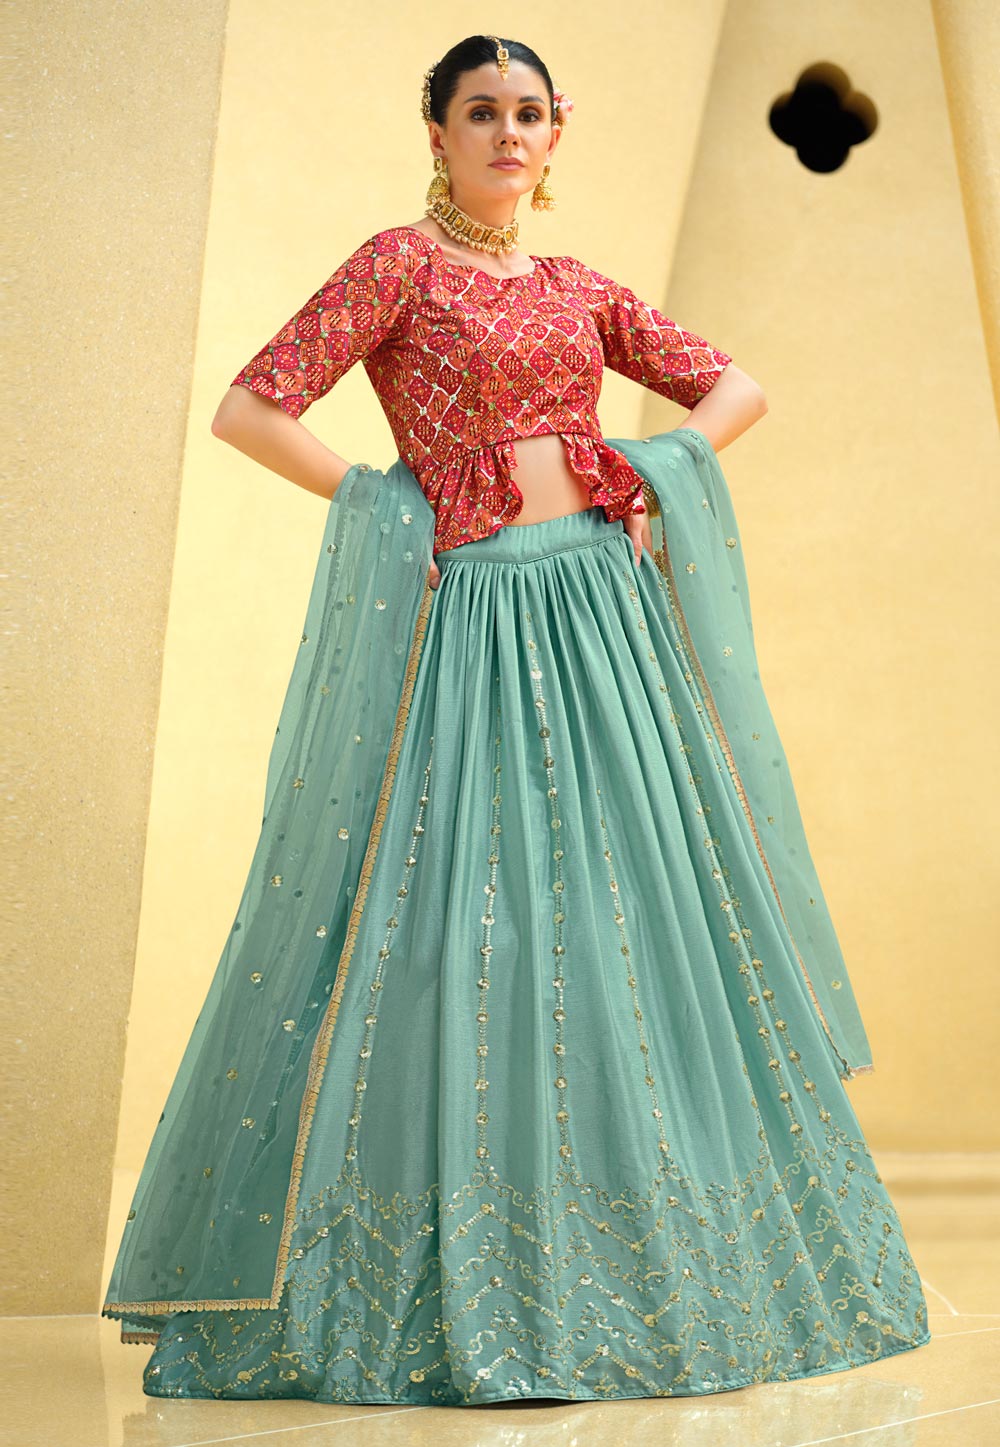 62 Latest Lehenga Blouse Designs To Try in (2022) - Tips and Beauty |  Designer blouse patterns, Long blouse designs, Lehenga wedding